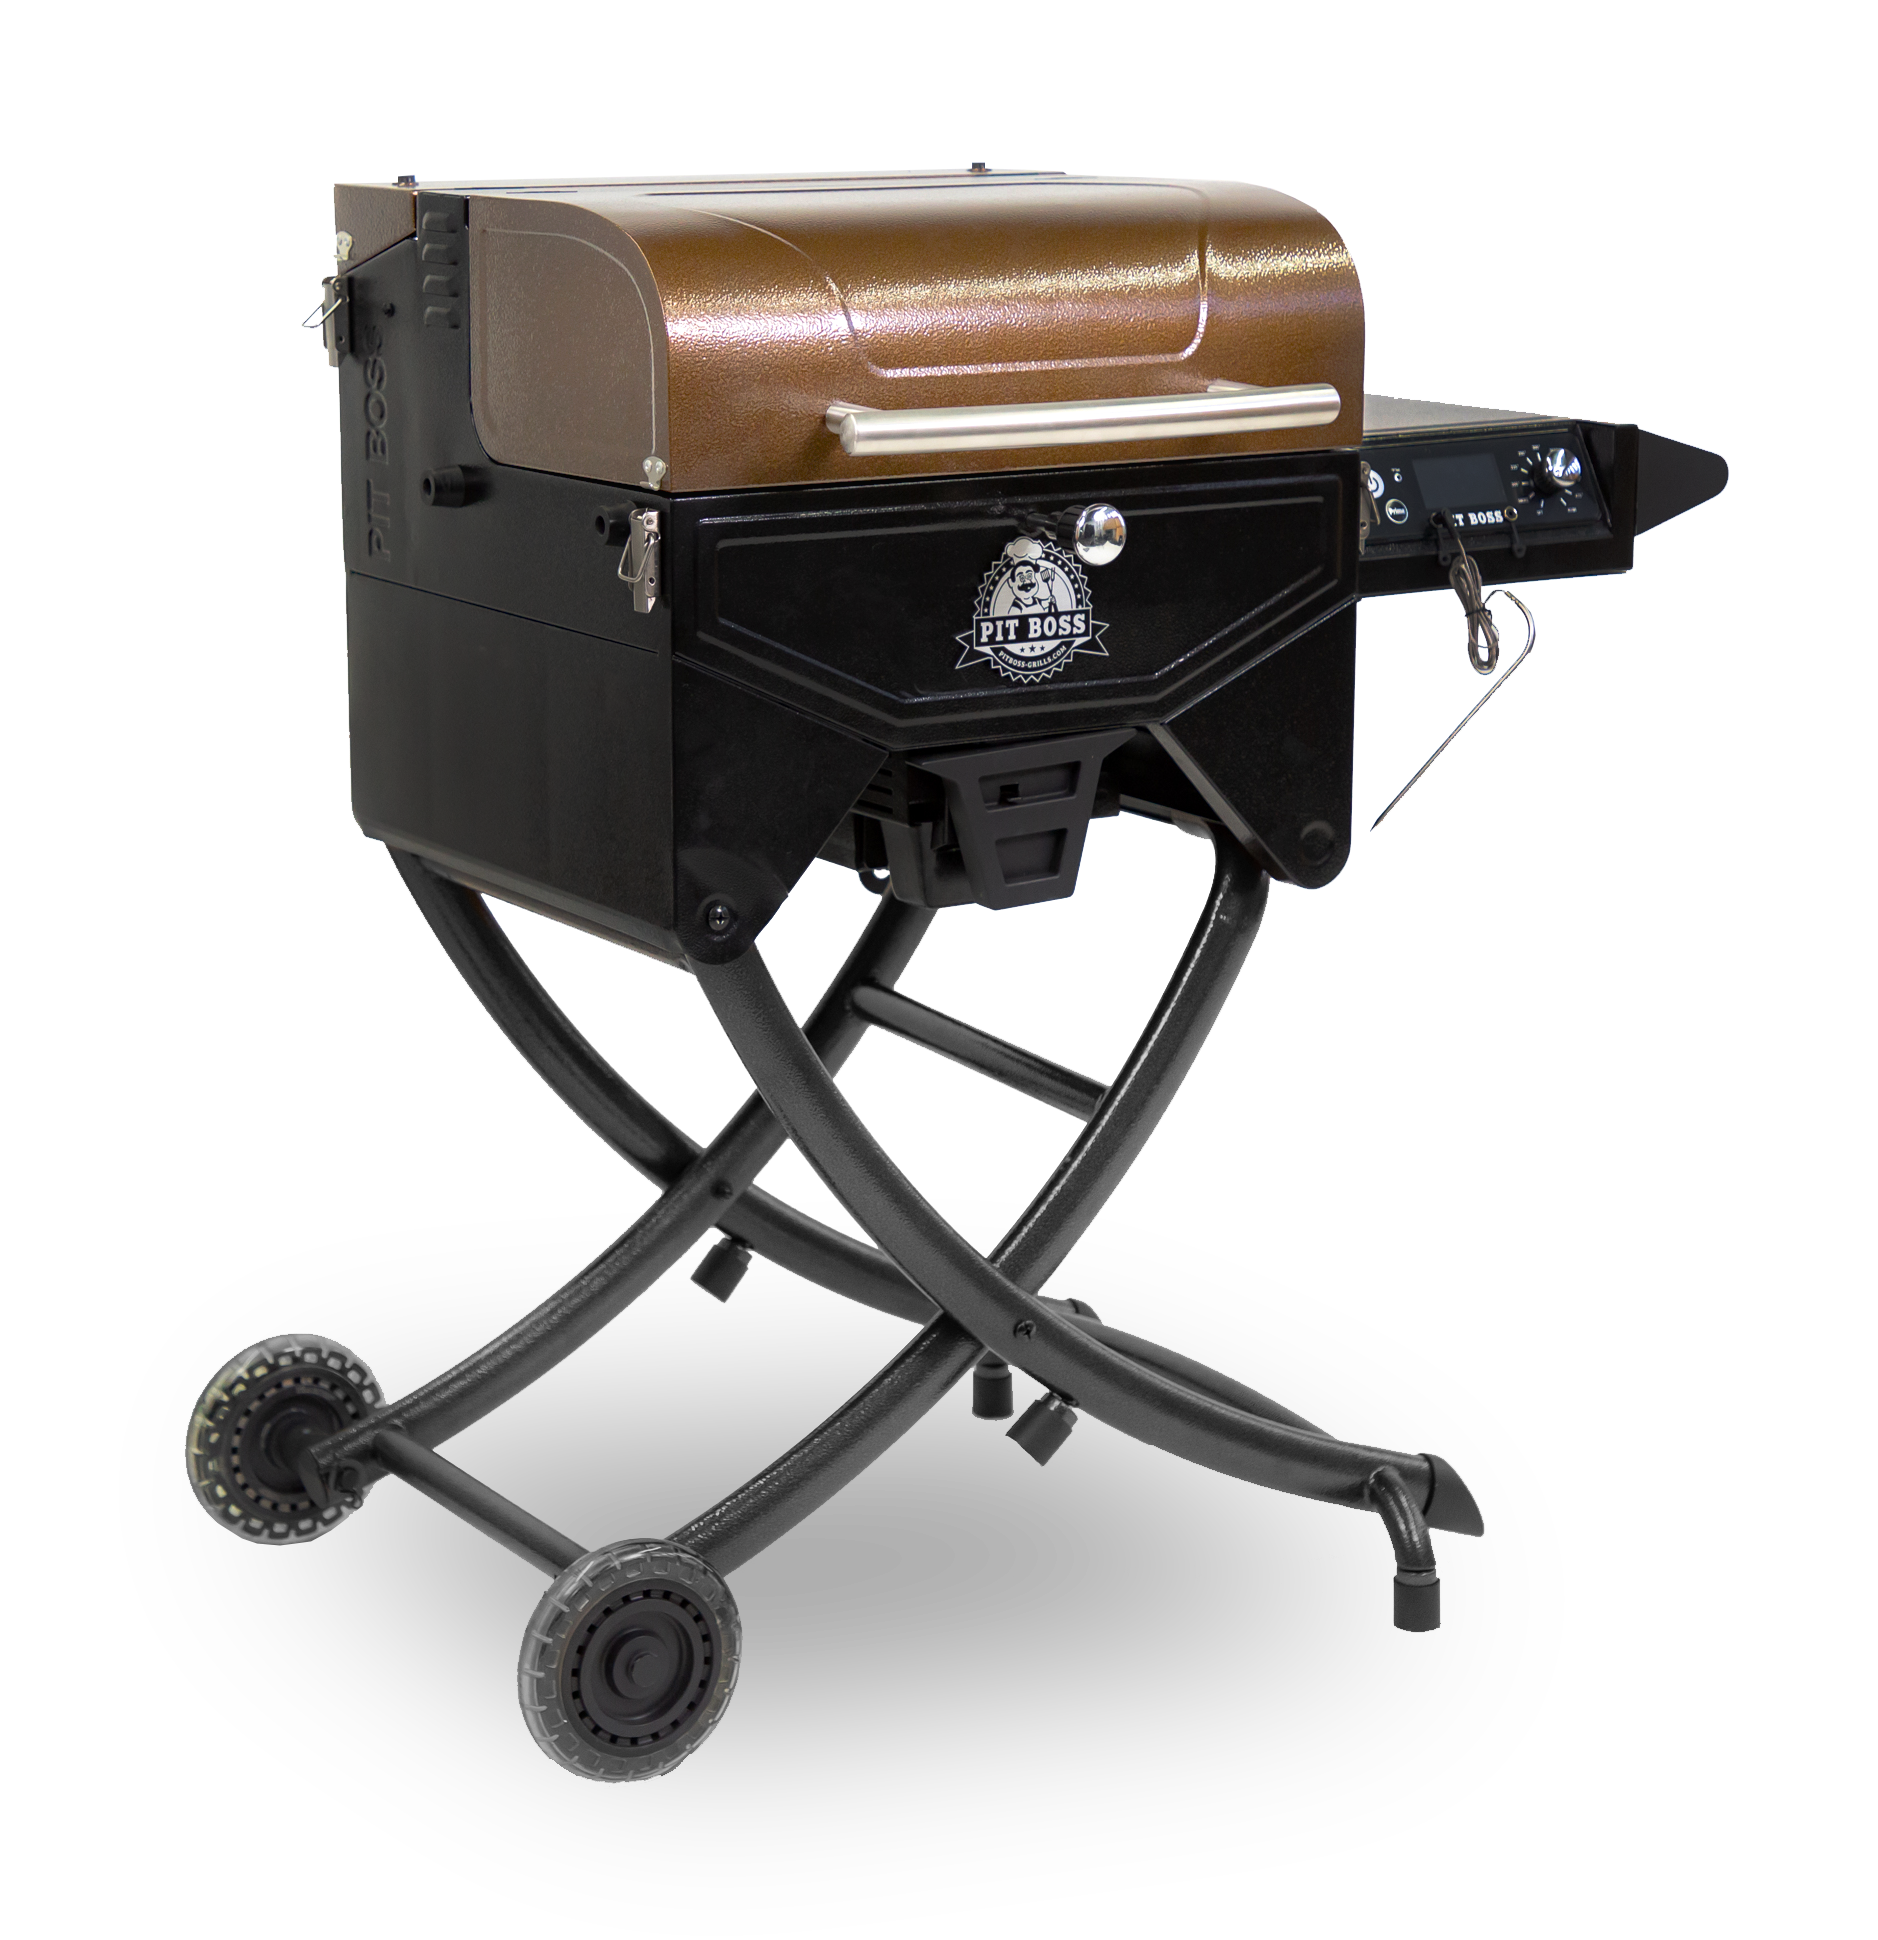 Pit Boss Portable Wood Pellet Grill, Pit Stop Smoker with foldable legs - image 3 of 8